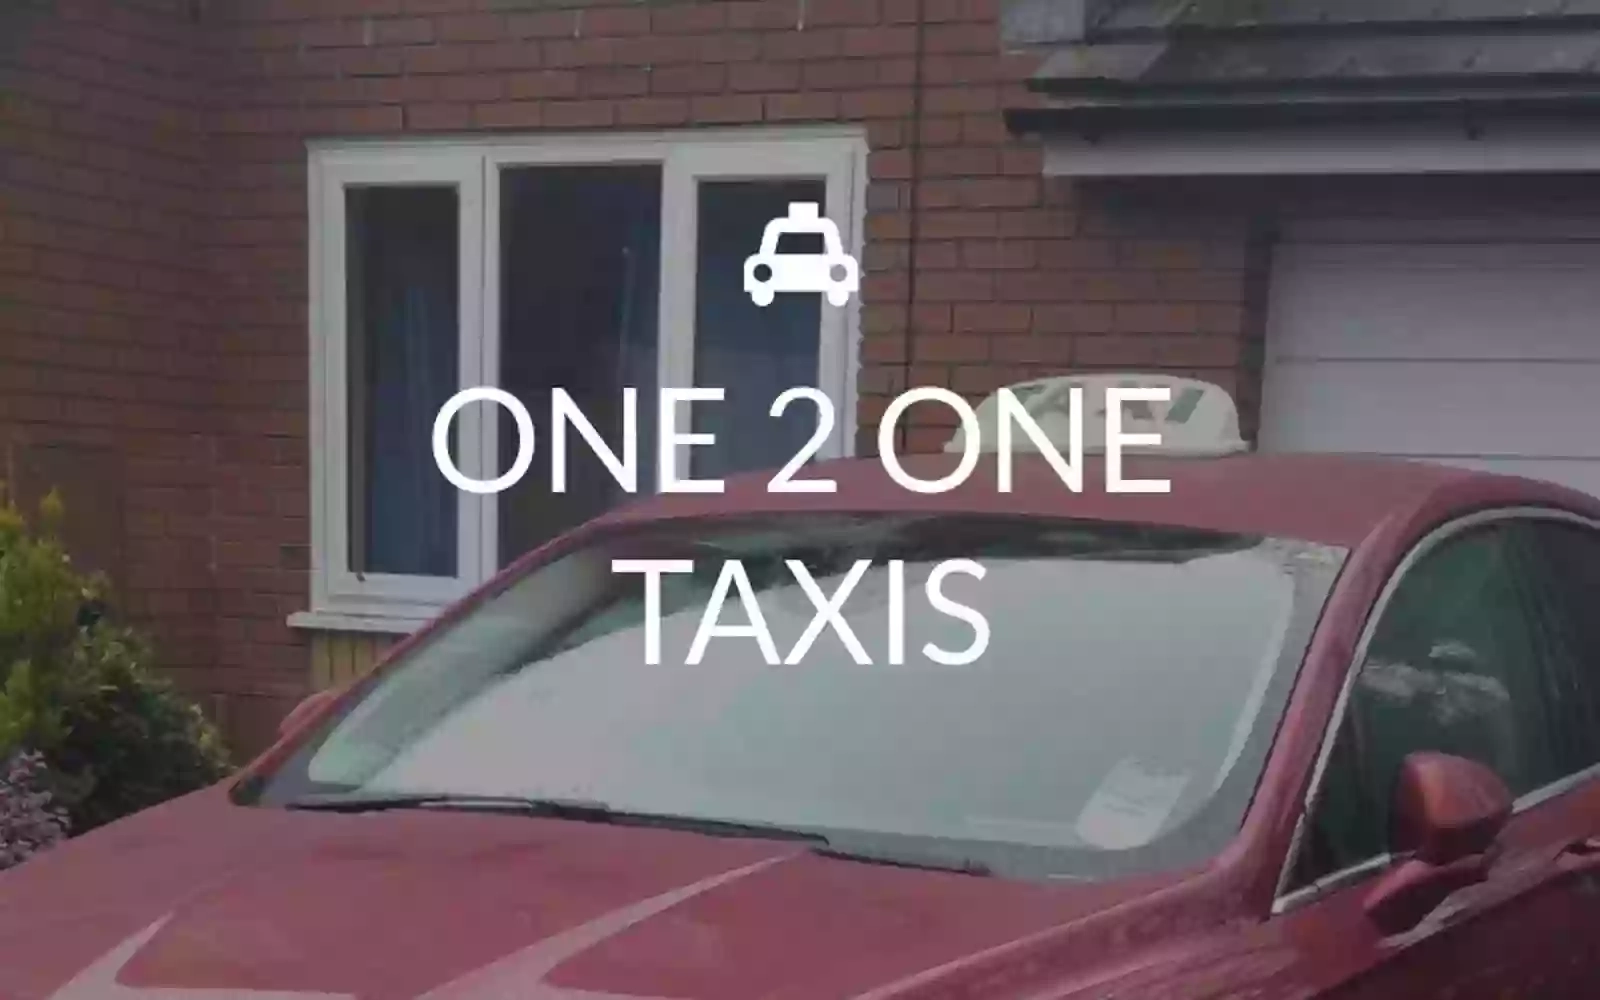 One 2 One Taxis